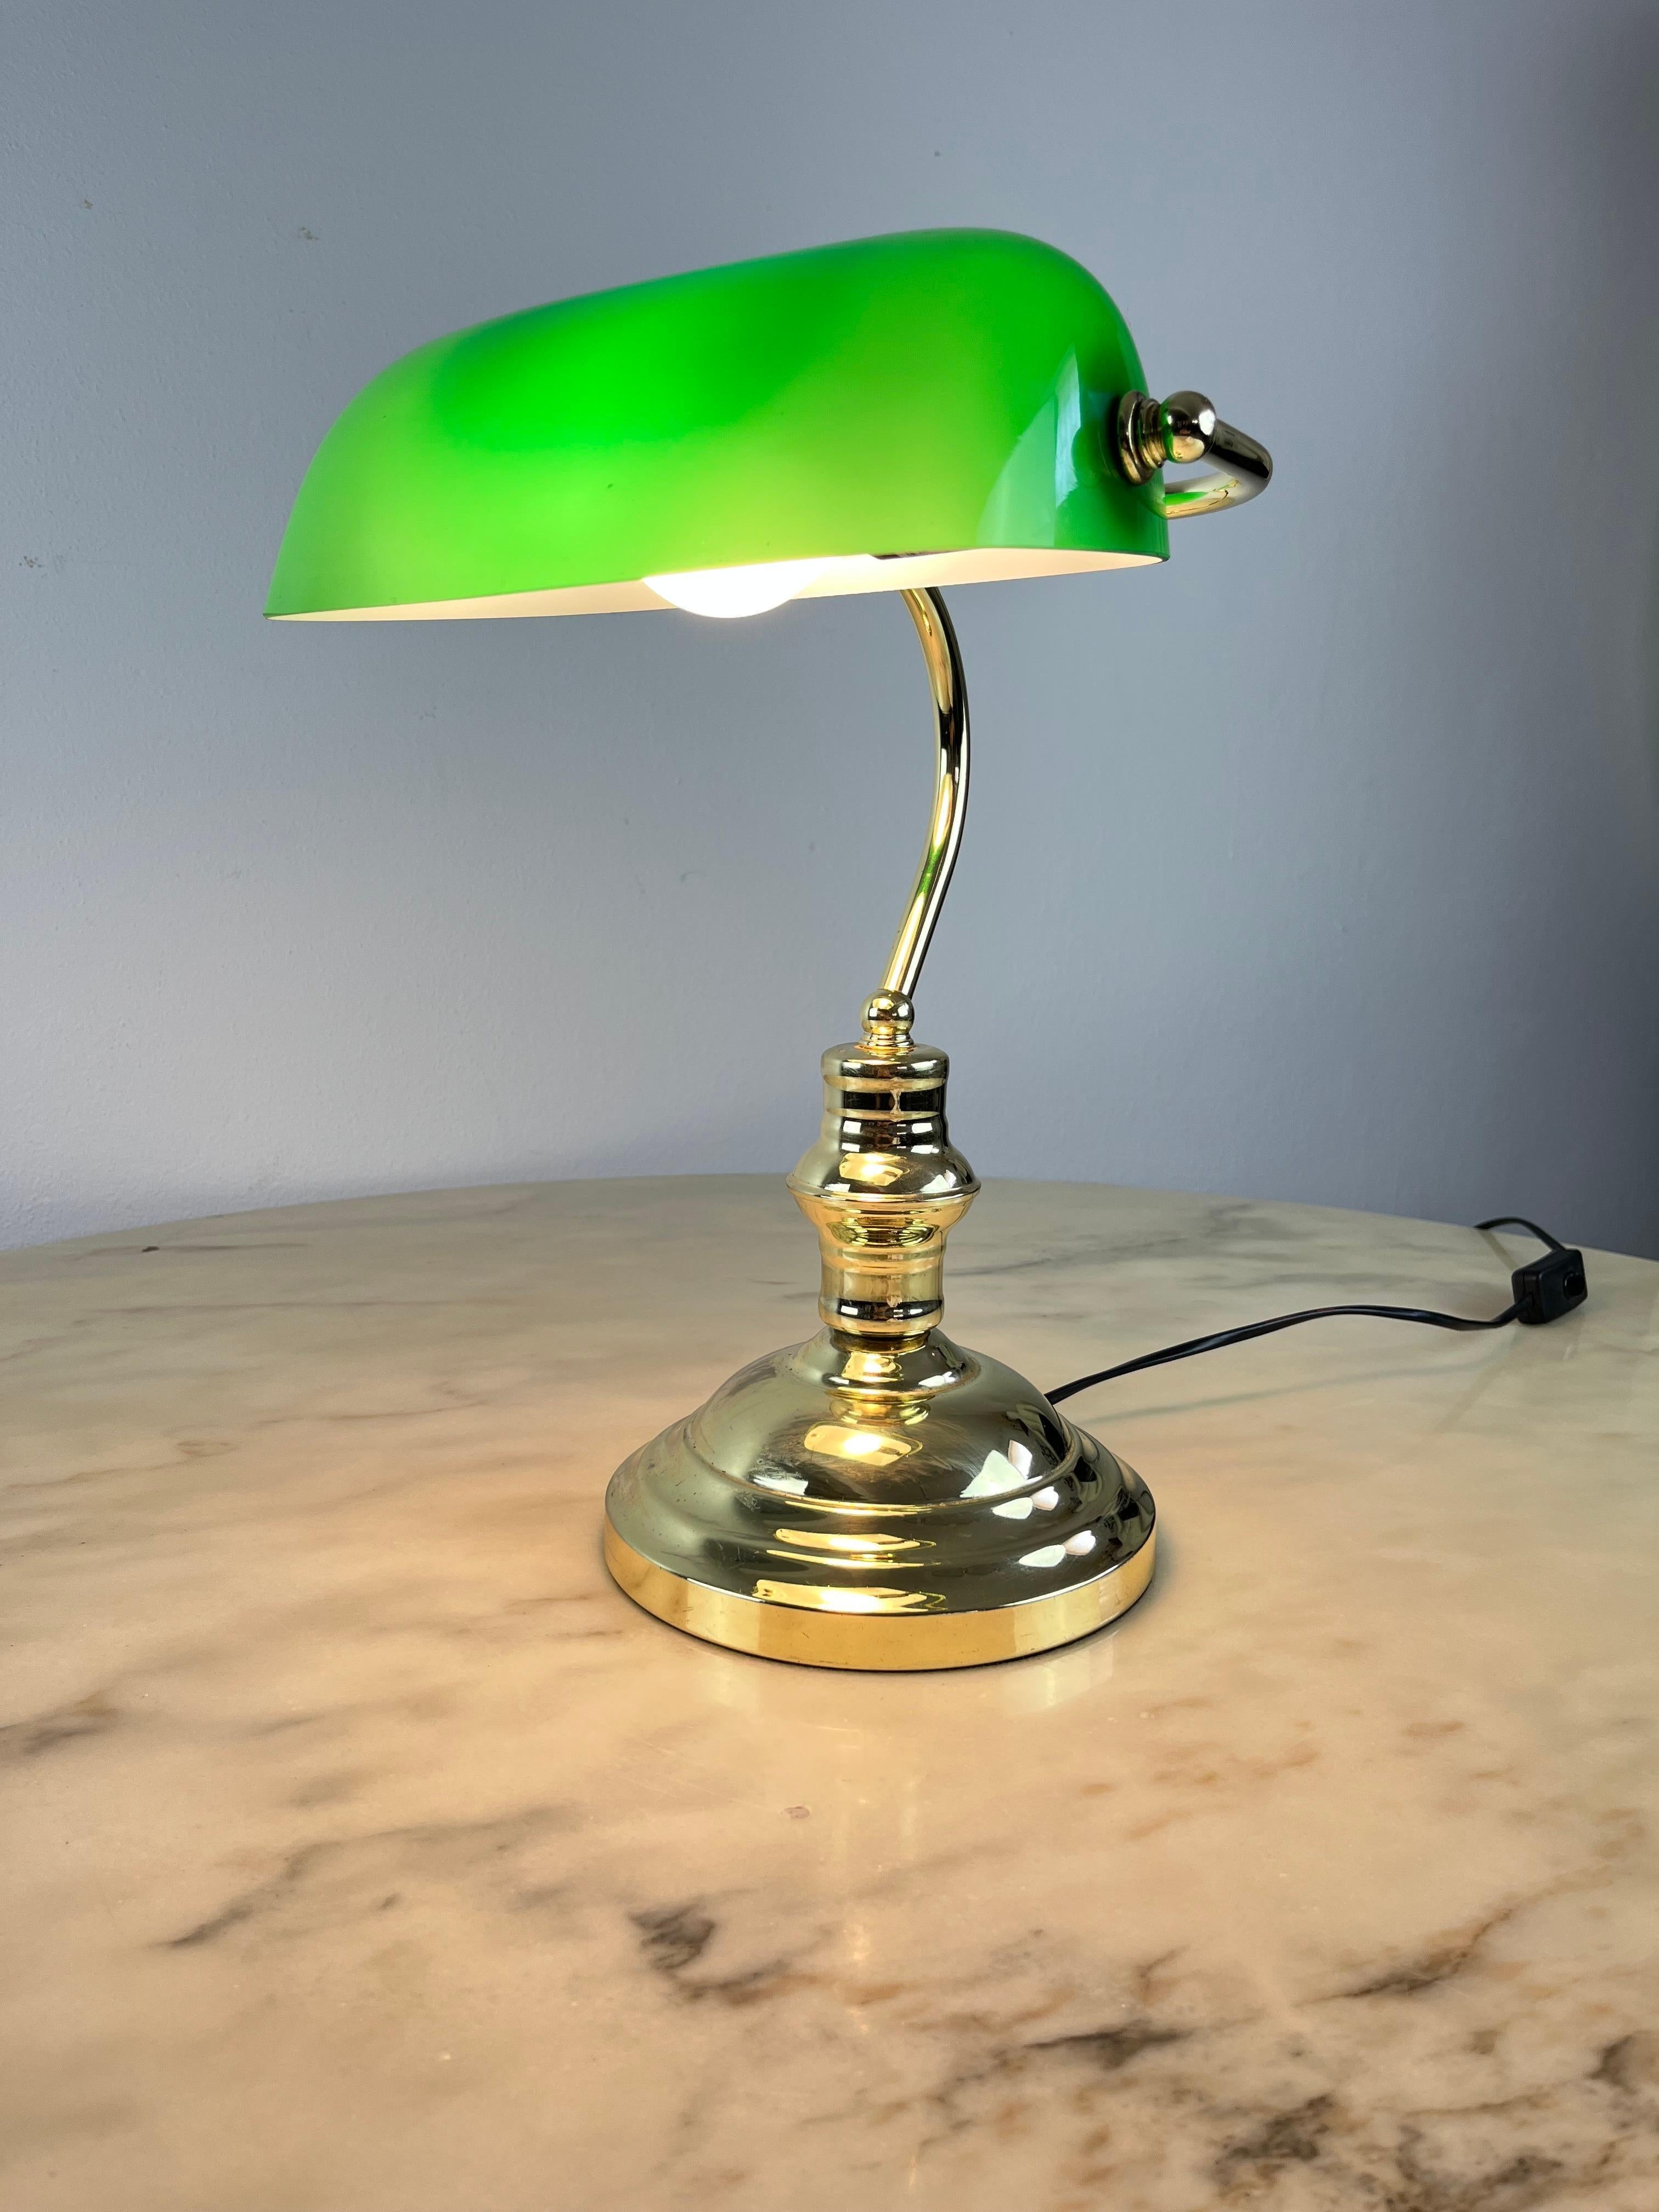 Ministerial lamp in gilded metal and colored glass, Italy, 1980s
Purchased by my grandfather for his desk, it is intact and functional. Small signs of the time.